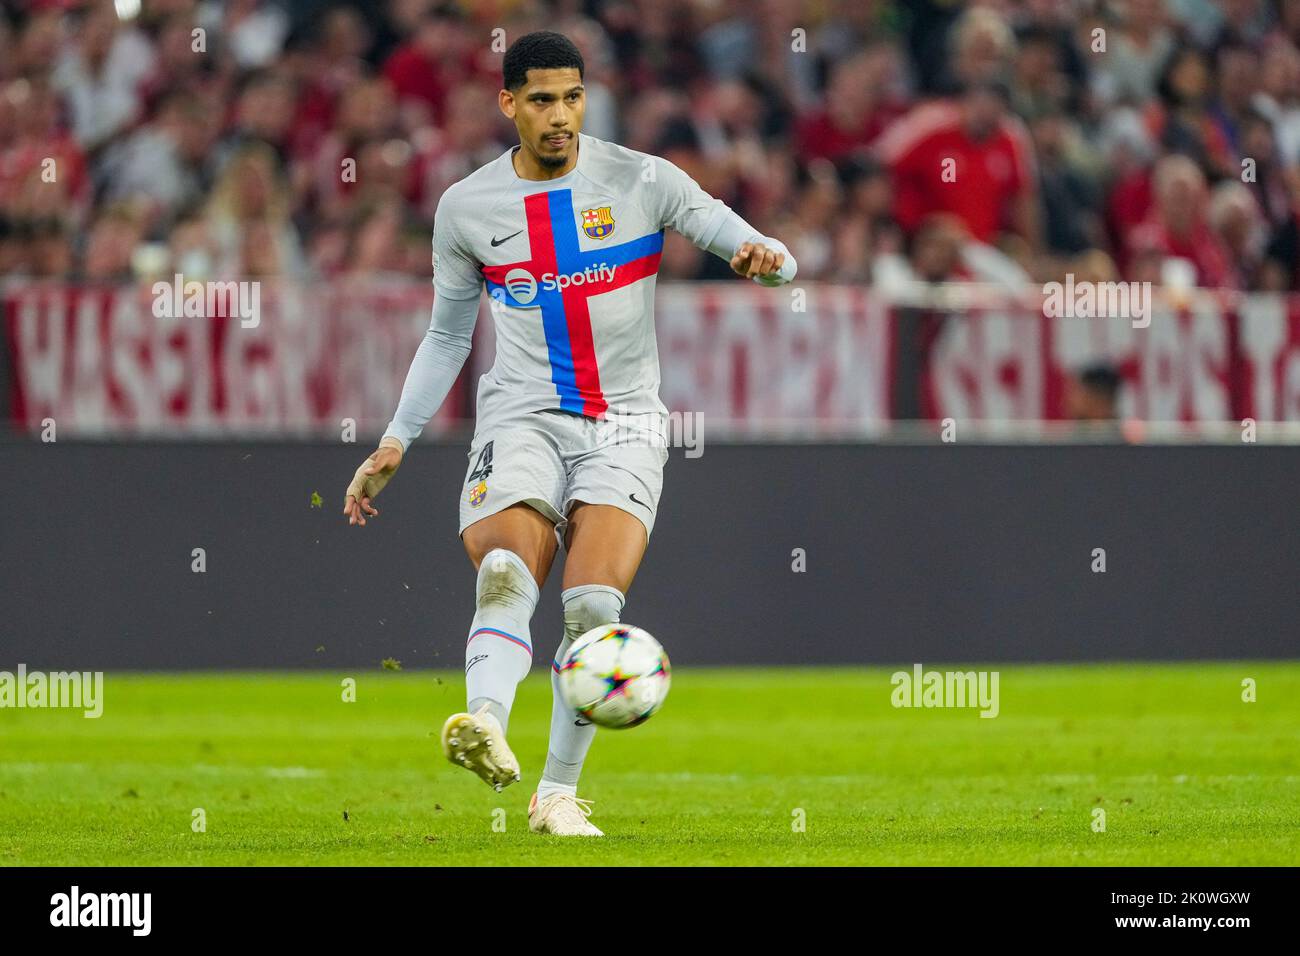 Munchen, Germany. 13th Sep, 2022. MUNCHEN, GERMANY - SEPTEMBER 13: Ronald Araujo of Barcelona during the UEFA Champions League group C match between Bayern Munchen and Barcelona at Allianz Arena on September 13, 2022 in Munchen, Germany (Photo by Geert van Erven/Orange Pictures) Credit: Orange Pics BV/Alamy Live News Stock Photo